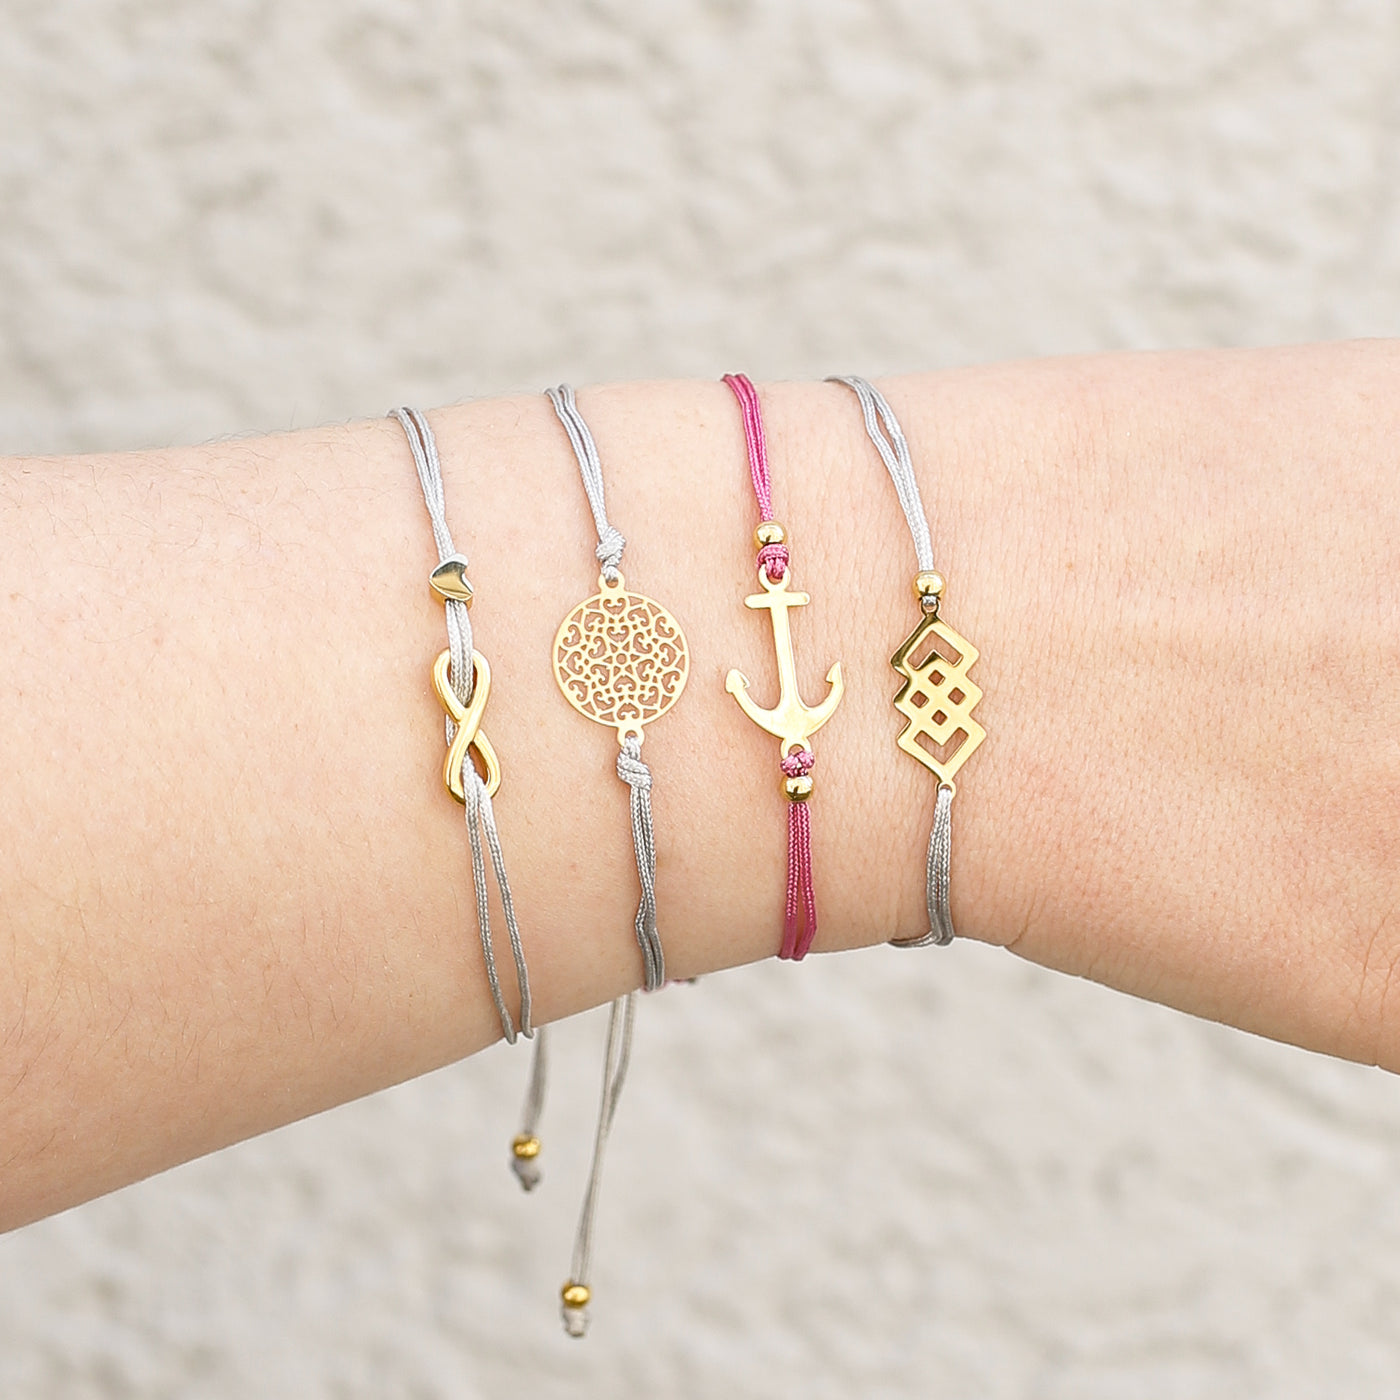 Bracelet with anchor pendant and Happiness greeting card